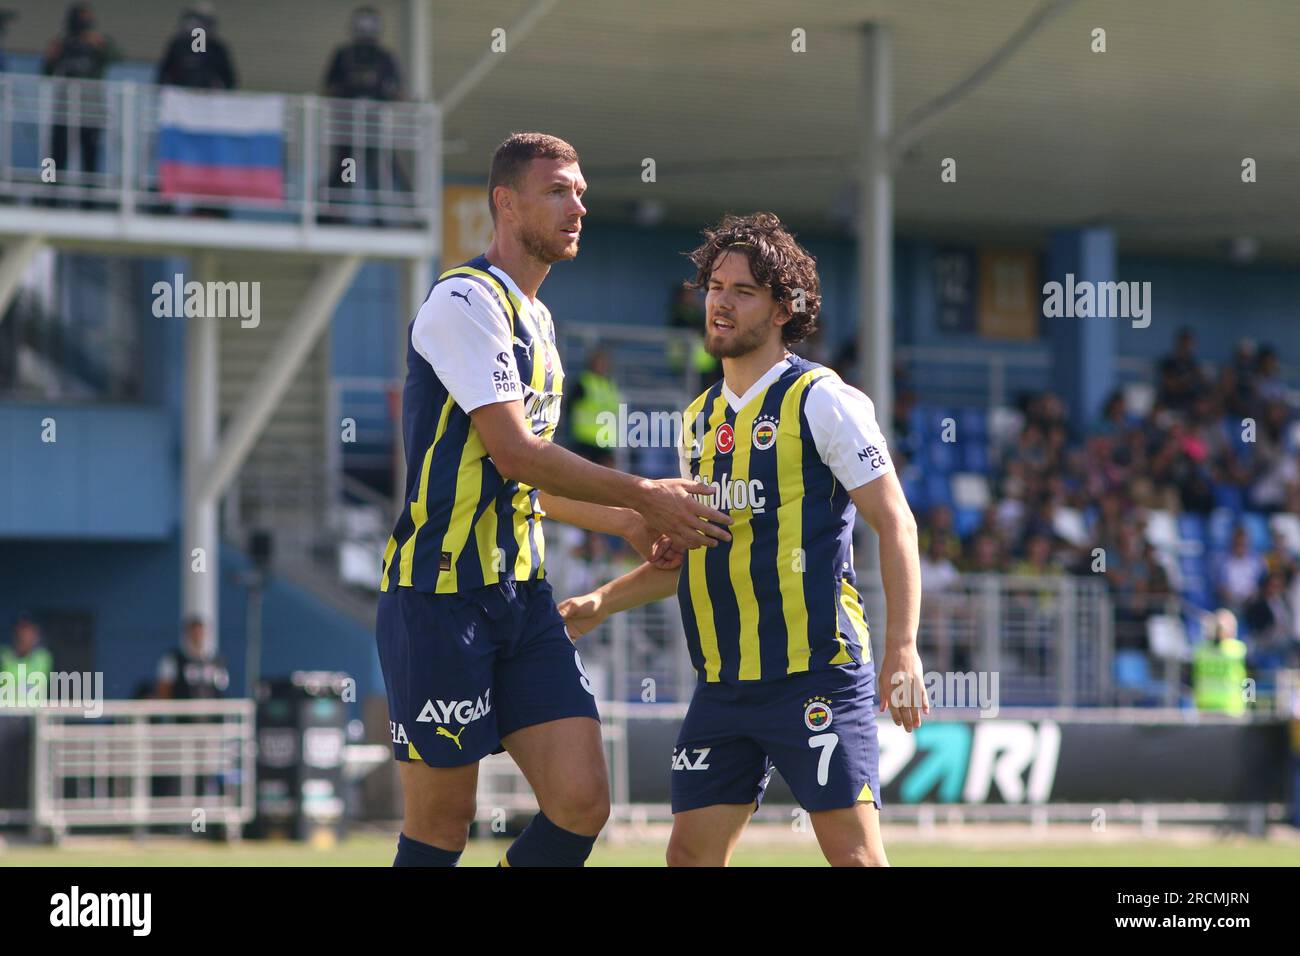 Saint Petersburg, Russia. 15th July, 2023. Edin Dzeko (L), Ferdi Kadioglu (R) of Fenerbahce in action during the Pari Premier Cup football match between Fenerbahce Istanbul and Neftci Baku at Stadium Smena. Fenerbahce S.K. team won against Neftci Baku PFK with a final score of 1:0. Credit: SOPA Images Limited/Alamy Live News Stock Photo